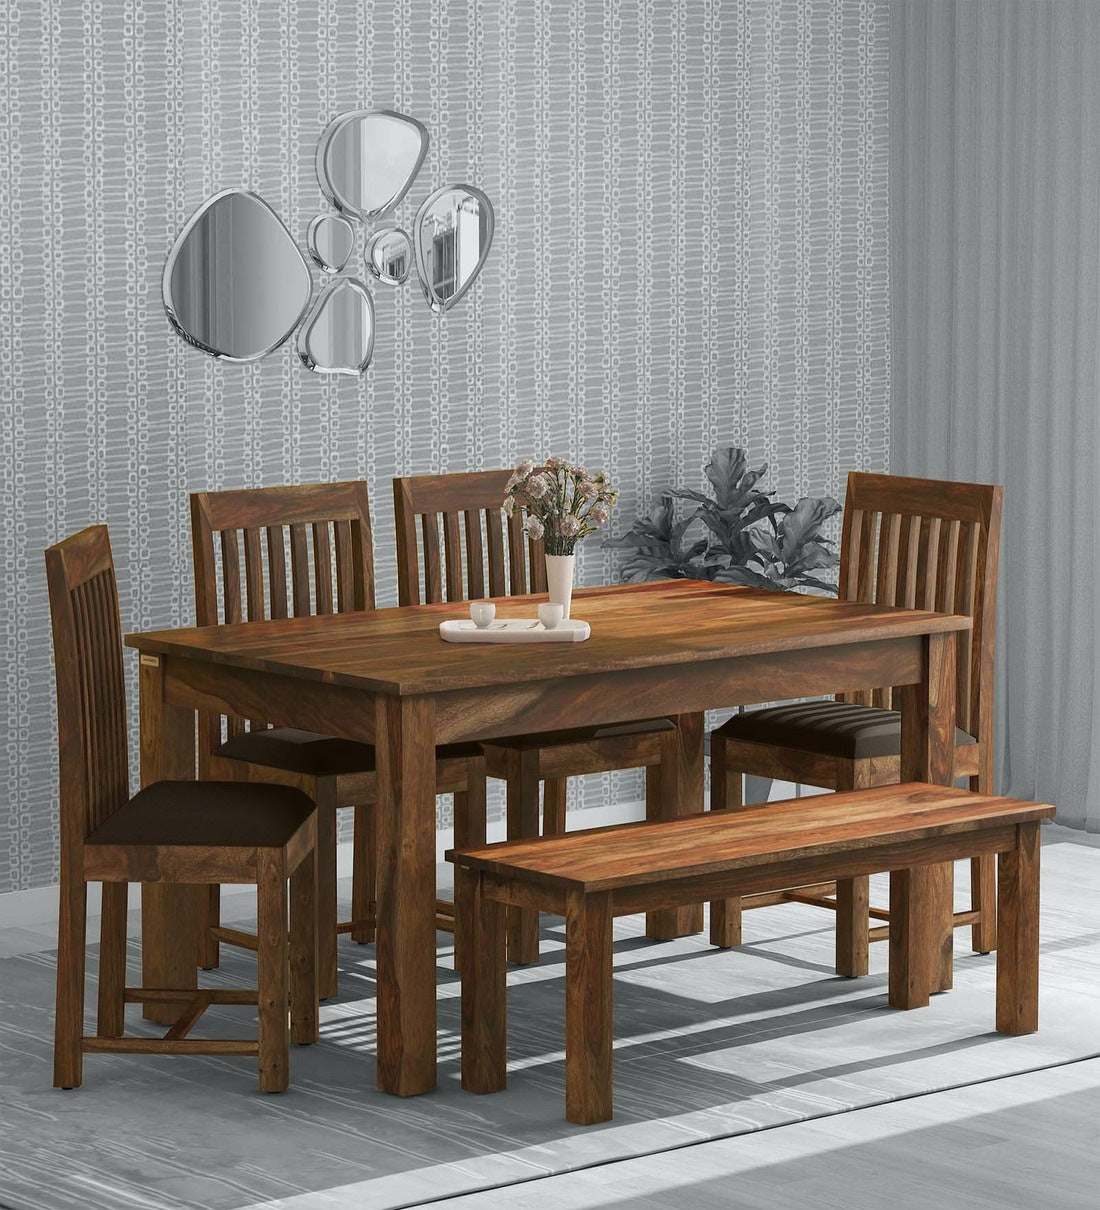 Peter Wooden 6 Seater Dining Set With Bench For Dining Room in Provincial Teak Finish - Rajwada Furnish